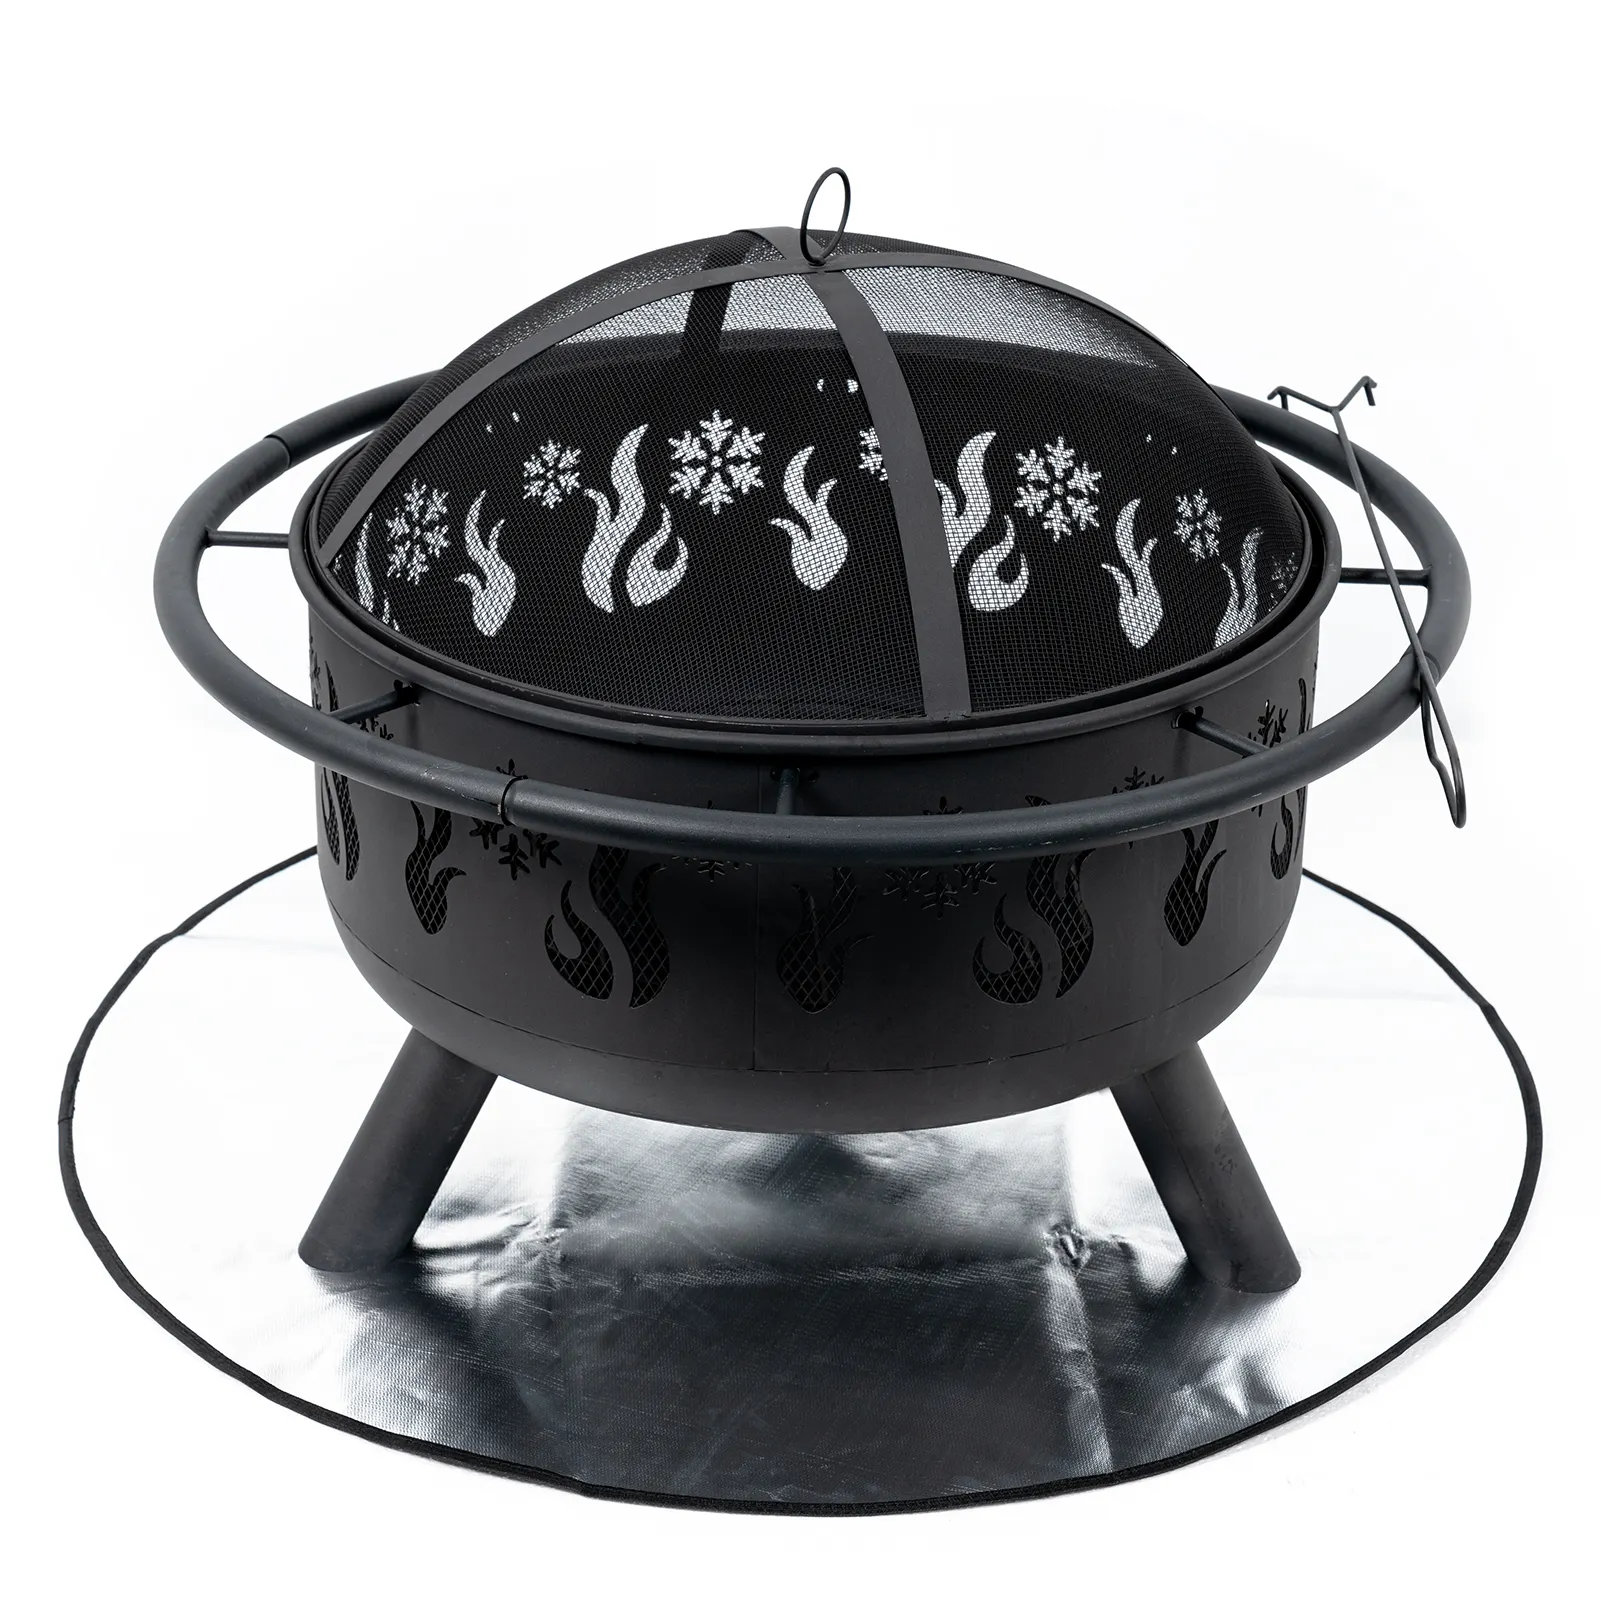 Stainless Portable Custom Steel Iron Fire Pits Wood Burning Smokeless Outdoor Fire BBQ Brazier Panggang Fireplace Forno Oven Feu